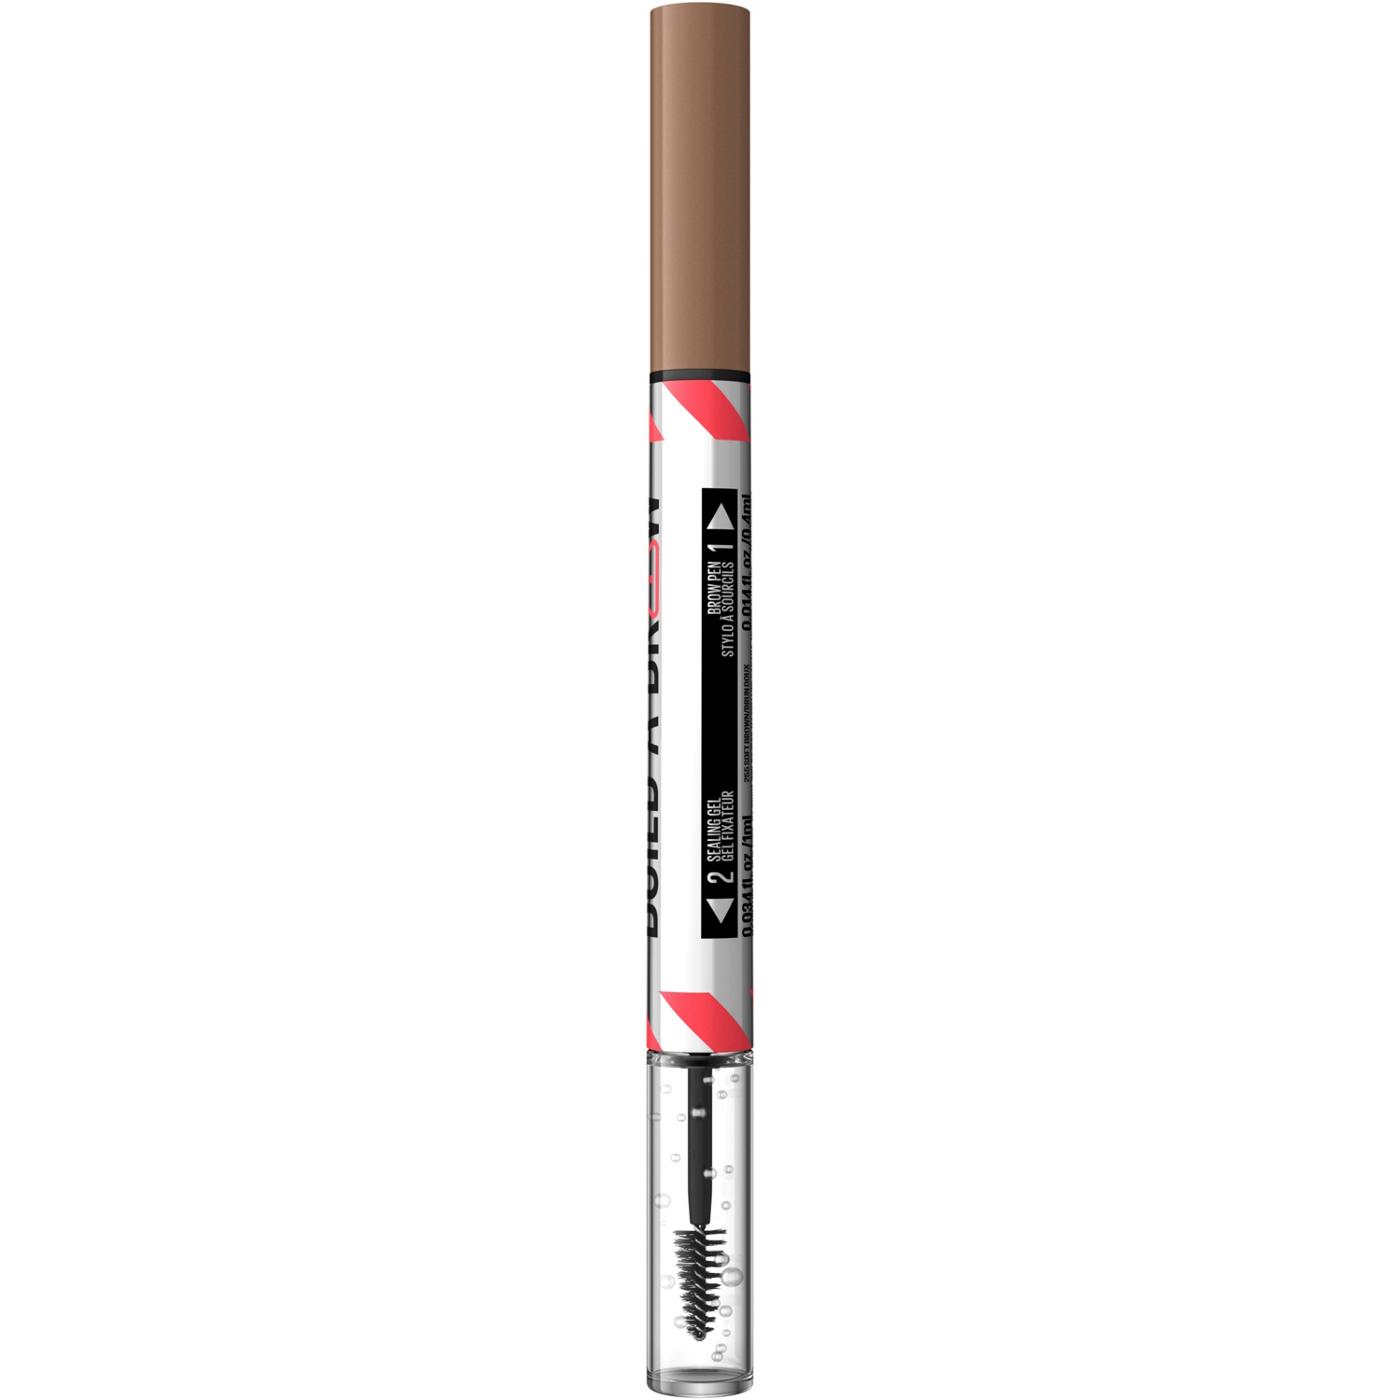 Maybelline Build A Brow 2 In 1 Brow Pen - Soft Brown; image 11 of 16